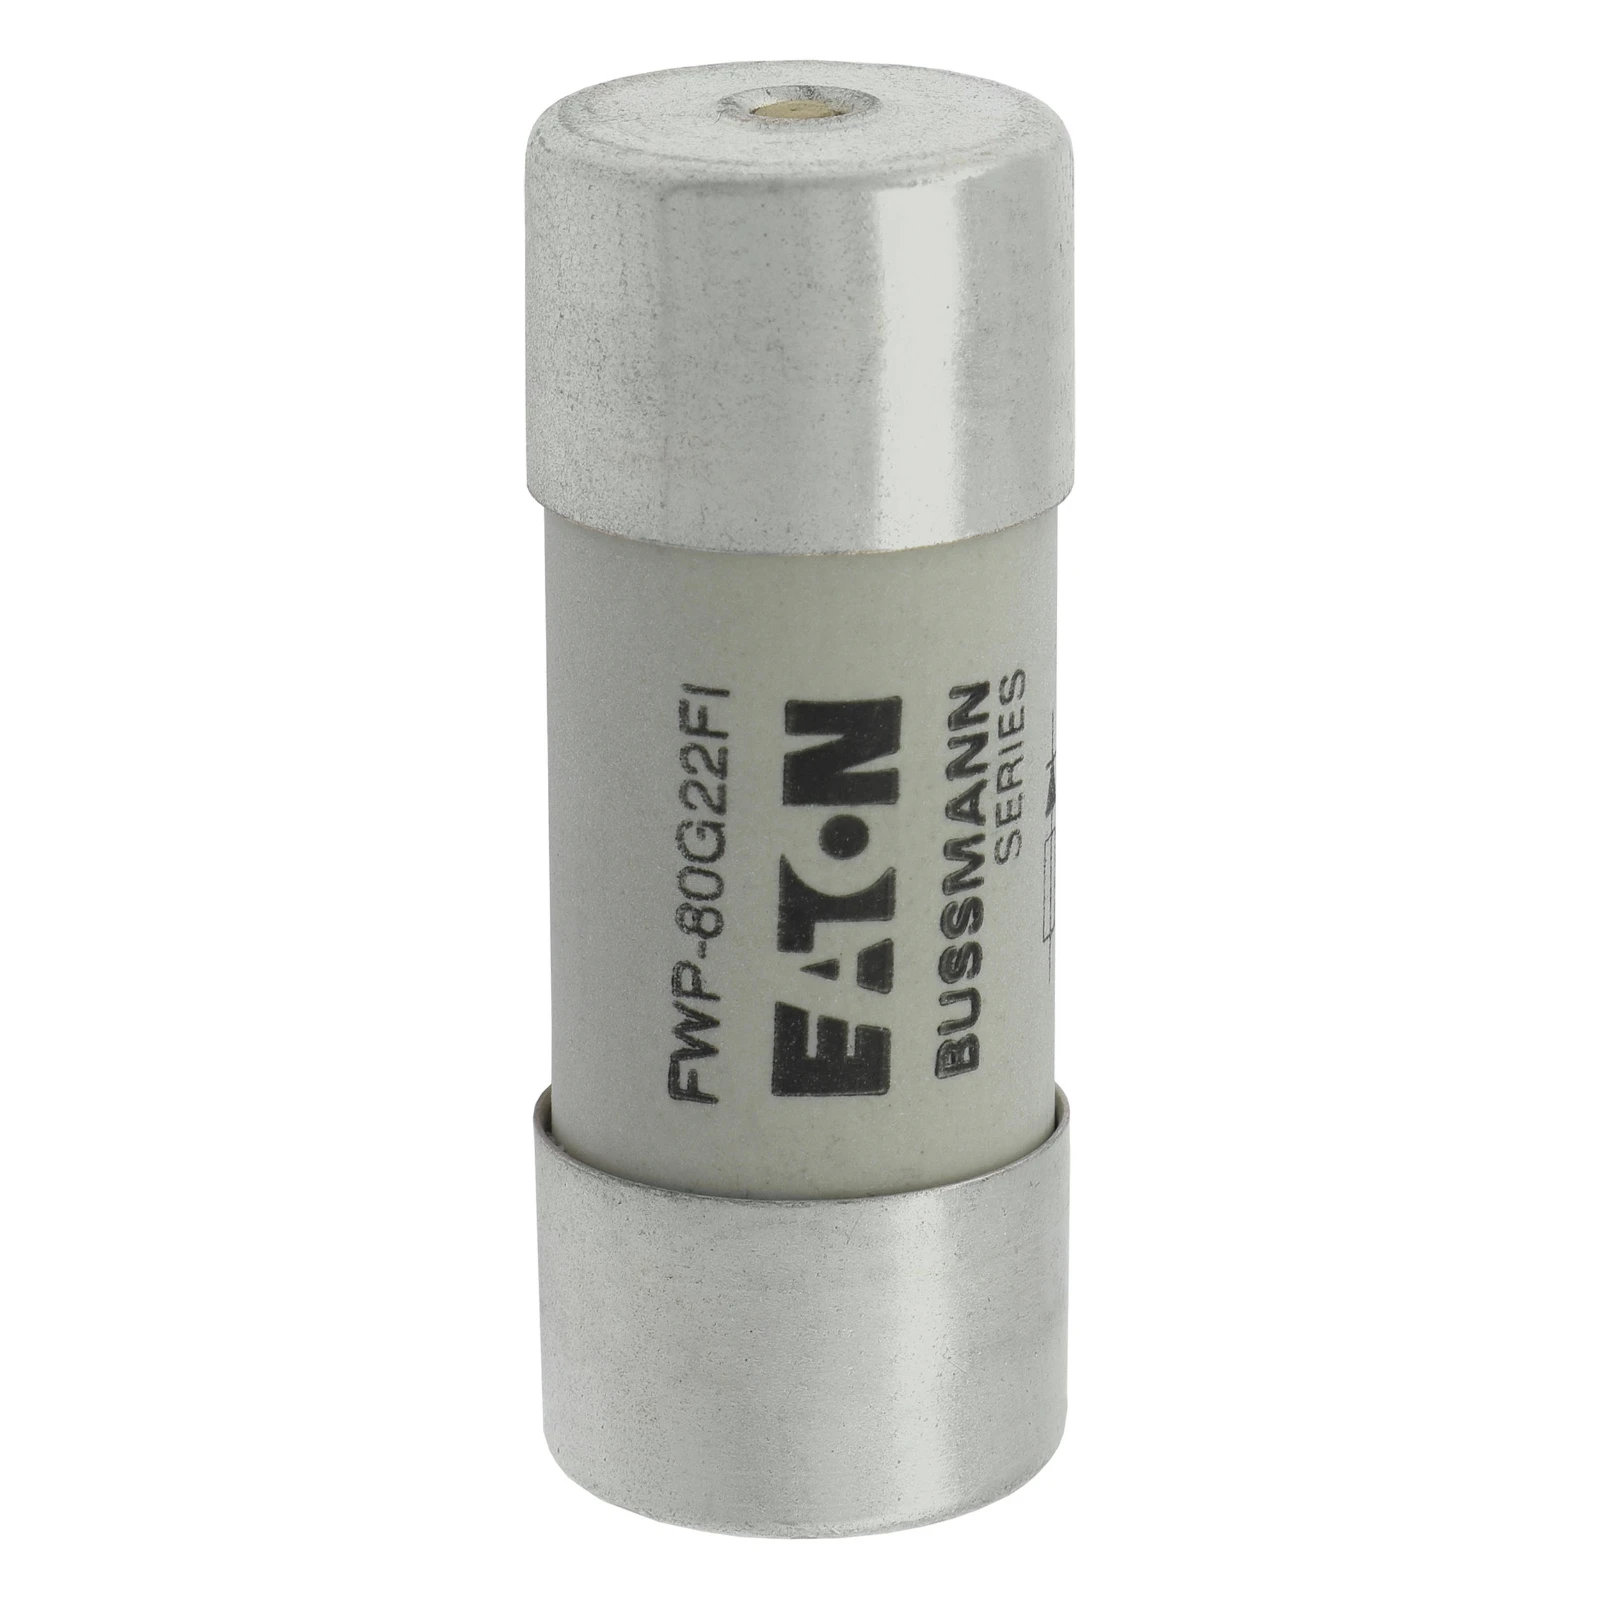 2545587 - Eaton Fuse 80A 690VAC gR 22x58 with Ind